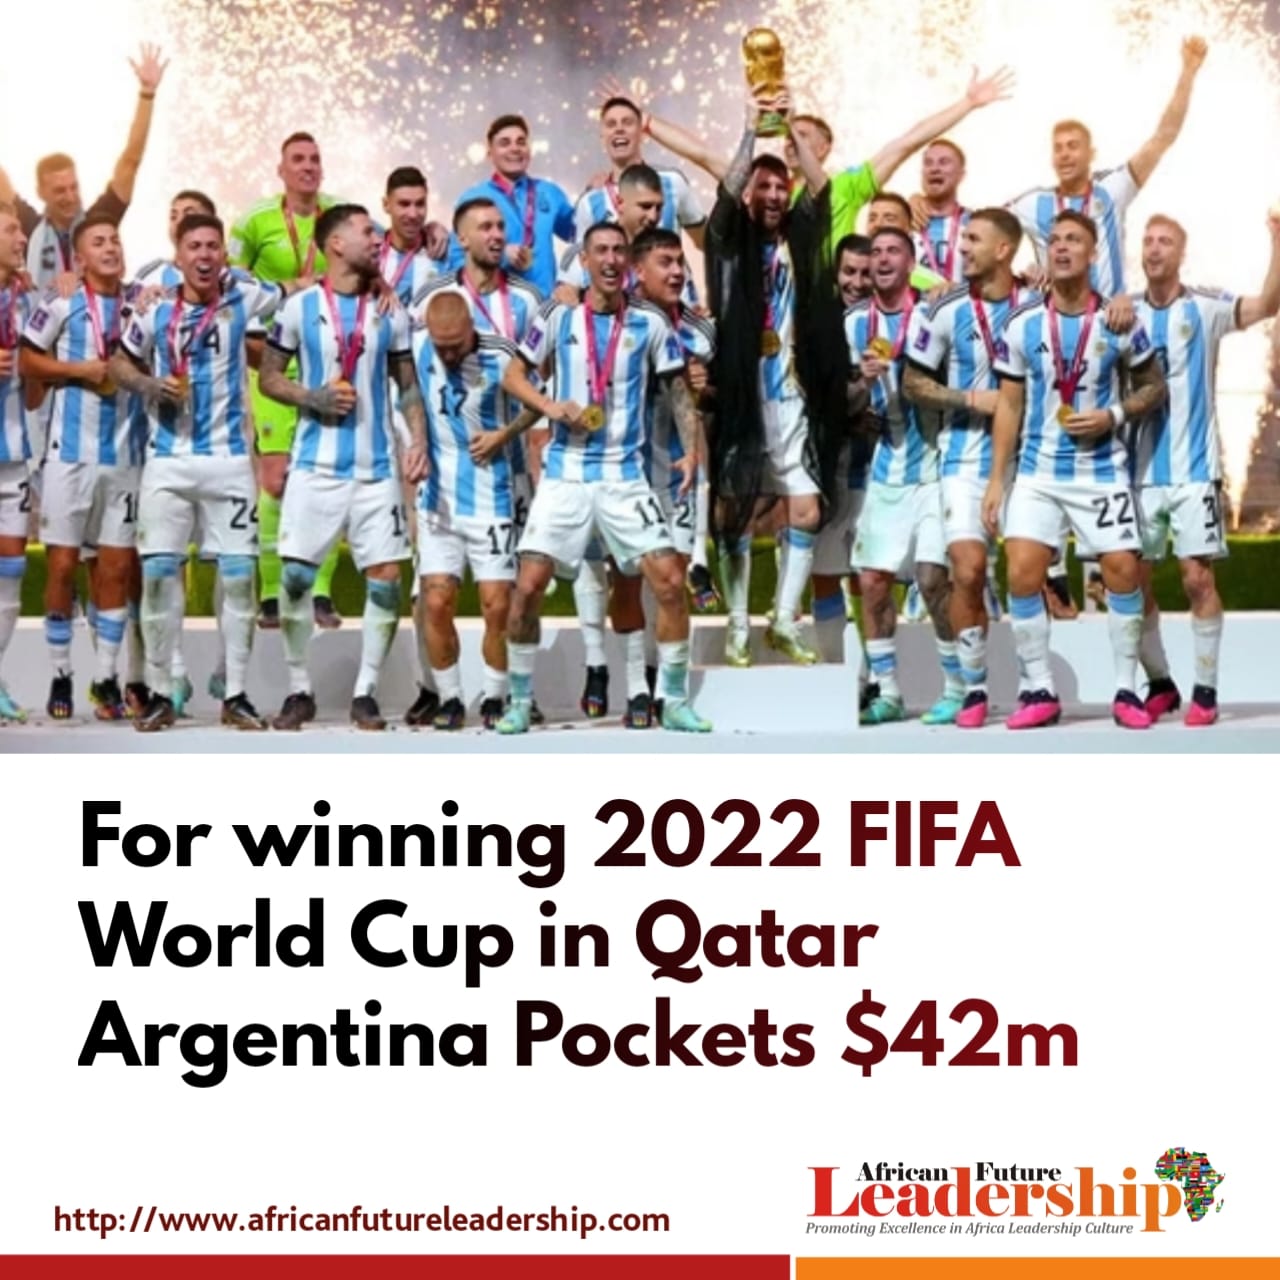 For winning 2022 FIFA World Cup in Qatar Argentina Pockets $42m